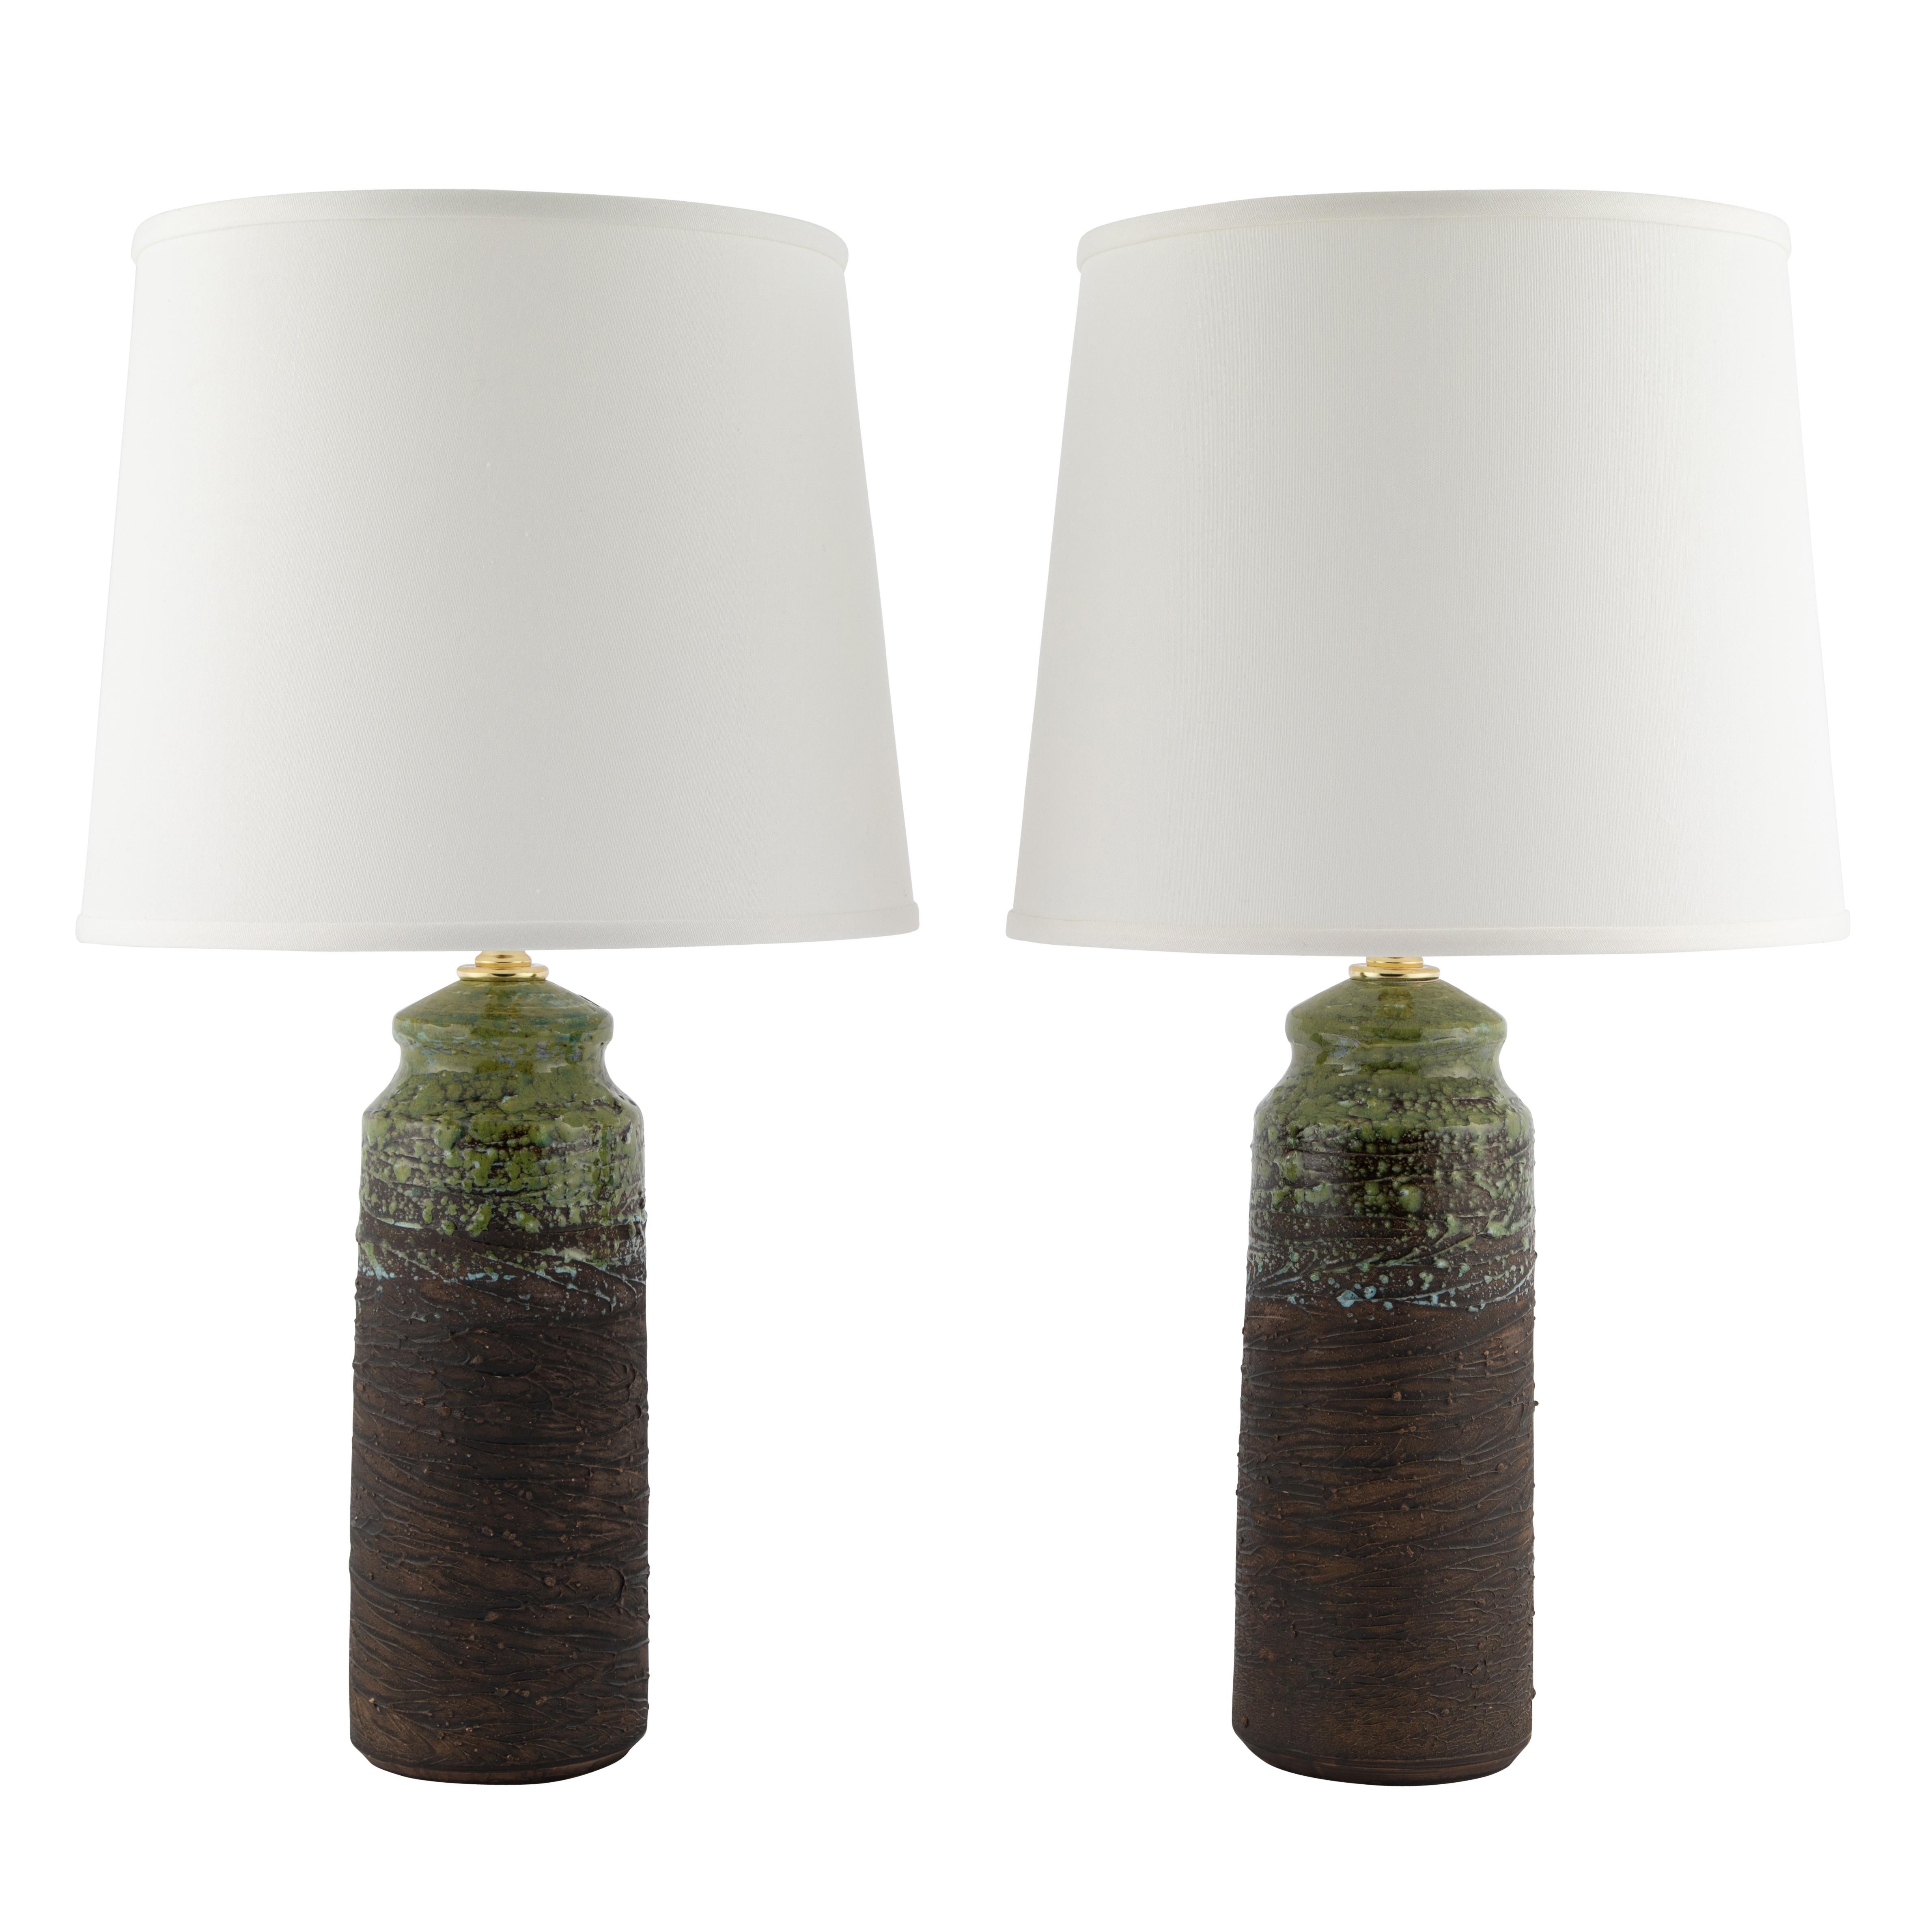 1960s Tilgmans of Sweden Brown Stoneware Table Lamps with Green Glaze Accents For Sale